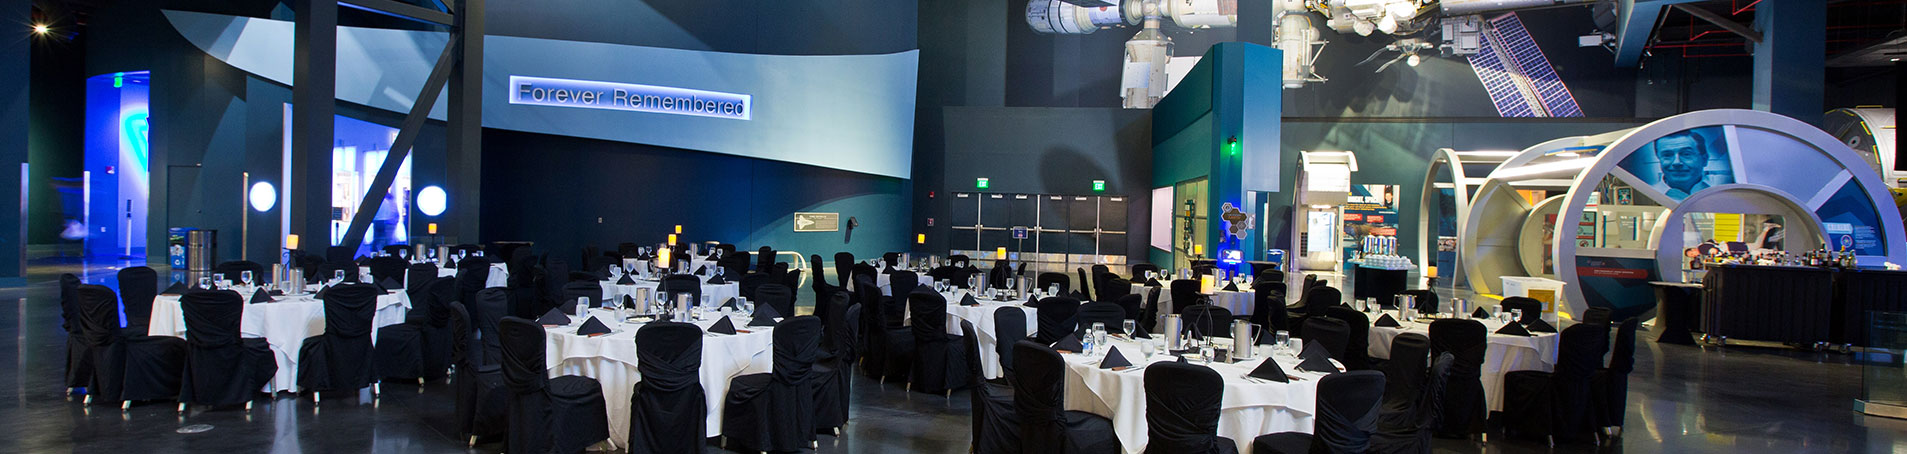 Host your private event beneath the wings of Space Shuttle Atlantis at this unique venue.